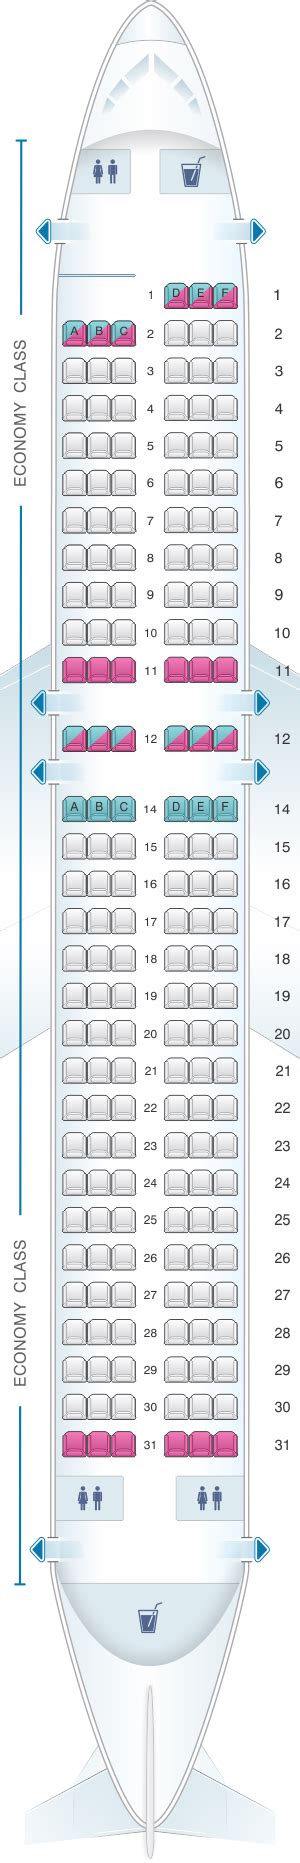 The Allegiant seating chart guide provides valuable information on the layout of the aircraft and the different seating options available. Whether you prefer a window seat for the best views or an aisle seat for easy access to the restroom, the seating chart guide can help you make an informed decision.